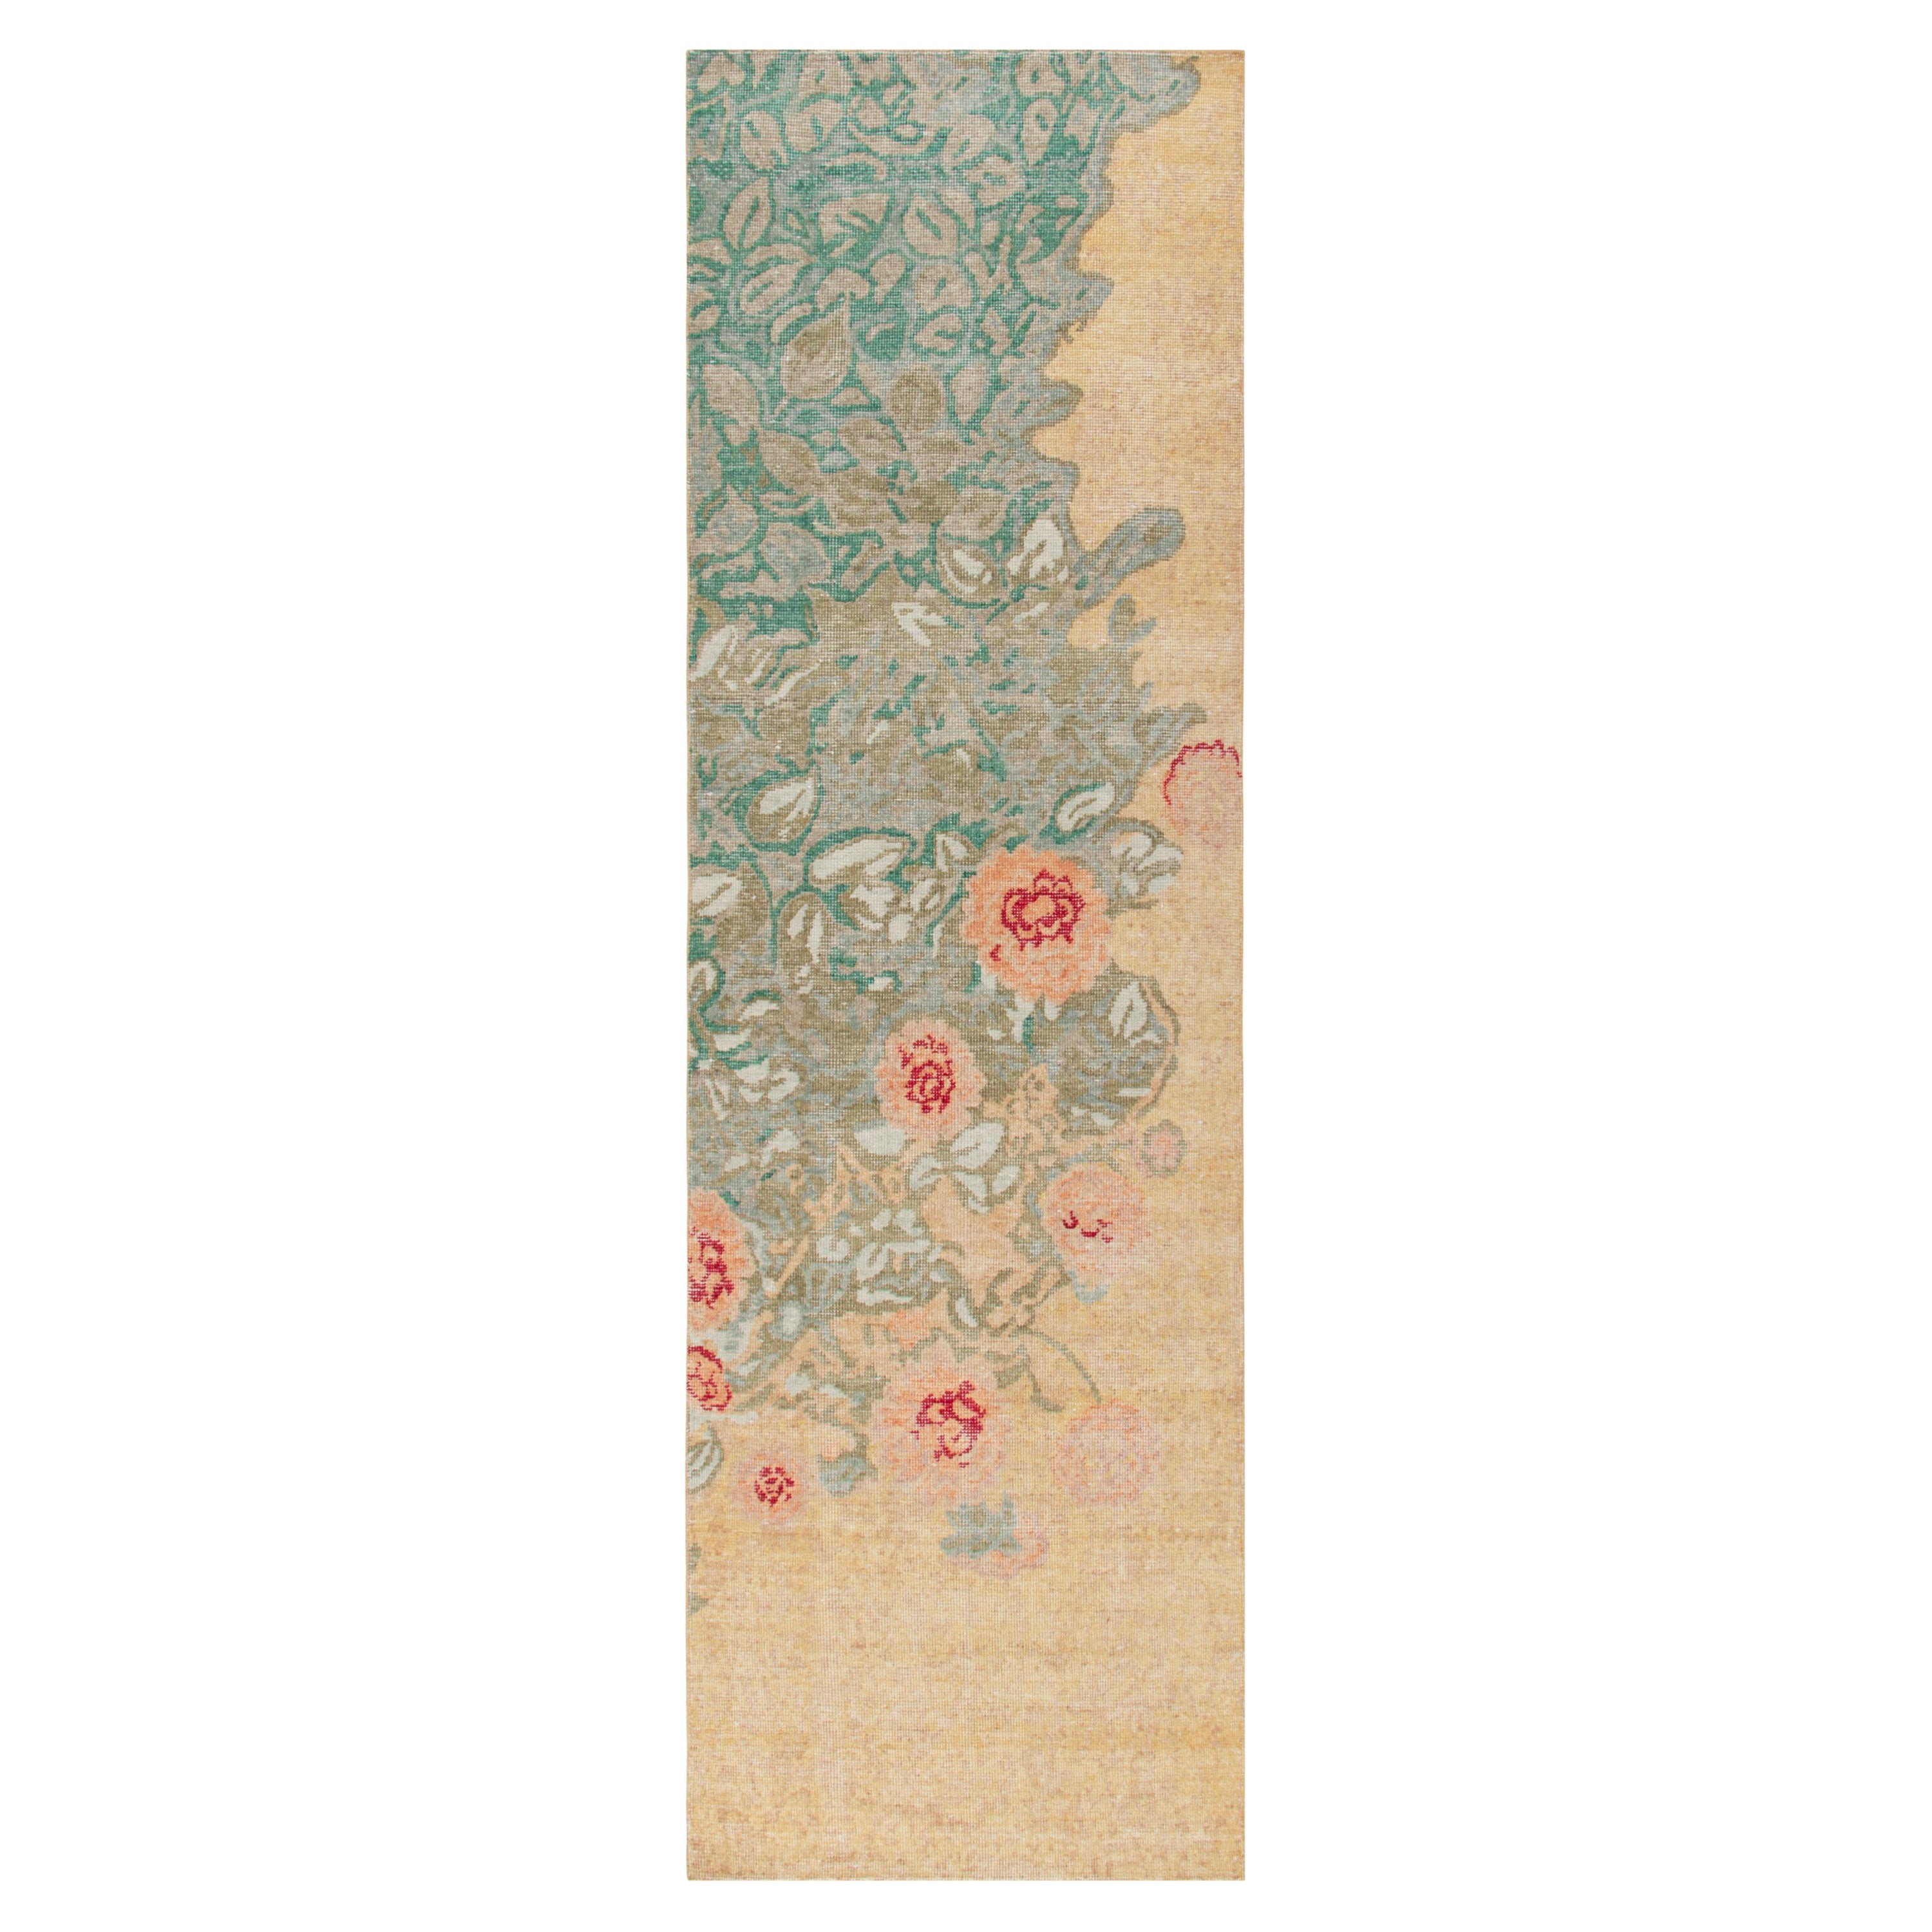 Rug & Kilim's Distressed Style Runner in Beige, Peach and Green Floral Pattern For Sale